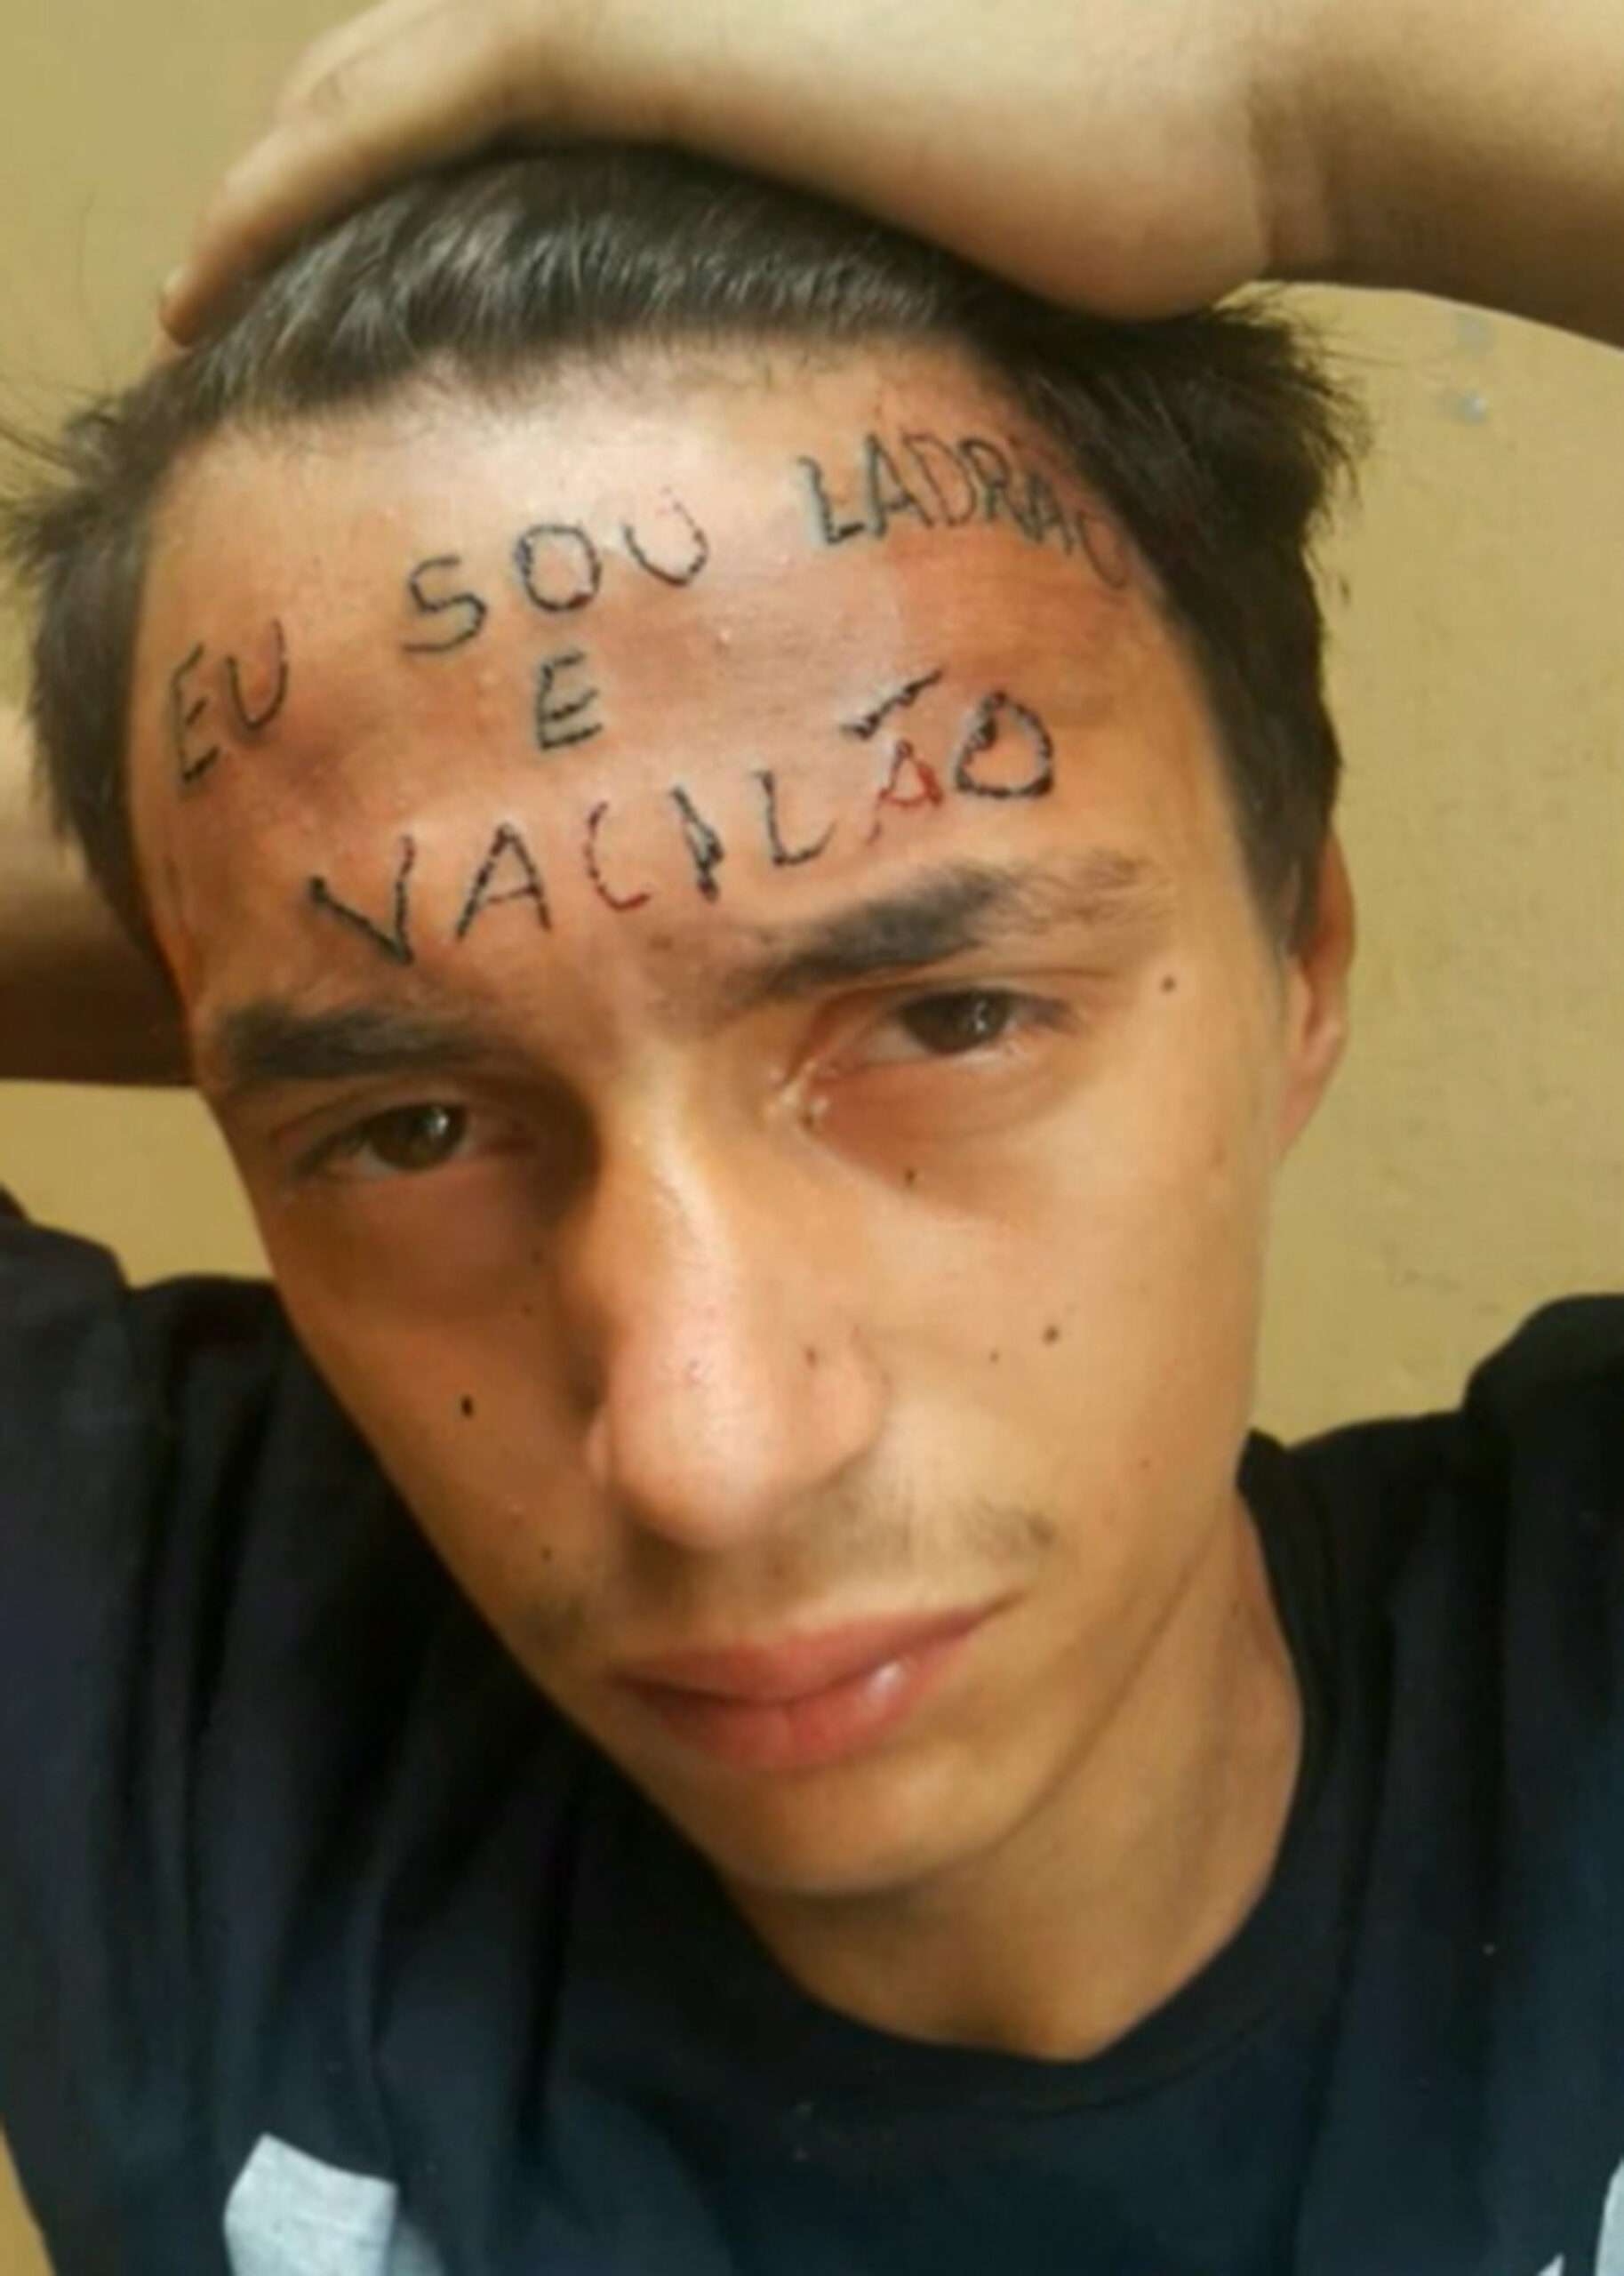 Read more about the article TAT’S QUITE A CLUE: Man With ‘I’m A Thief And Idiot’ Inked On Forehead Seized For Theft